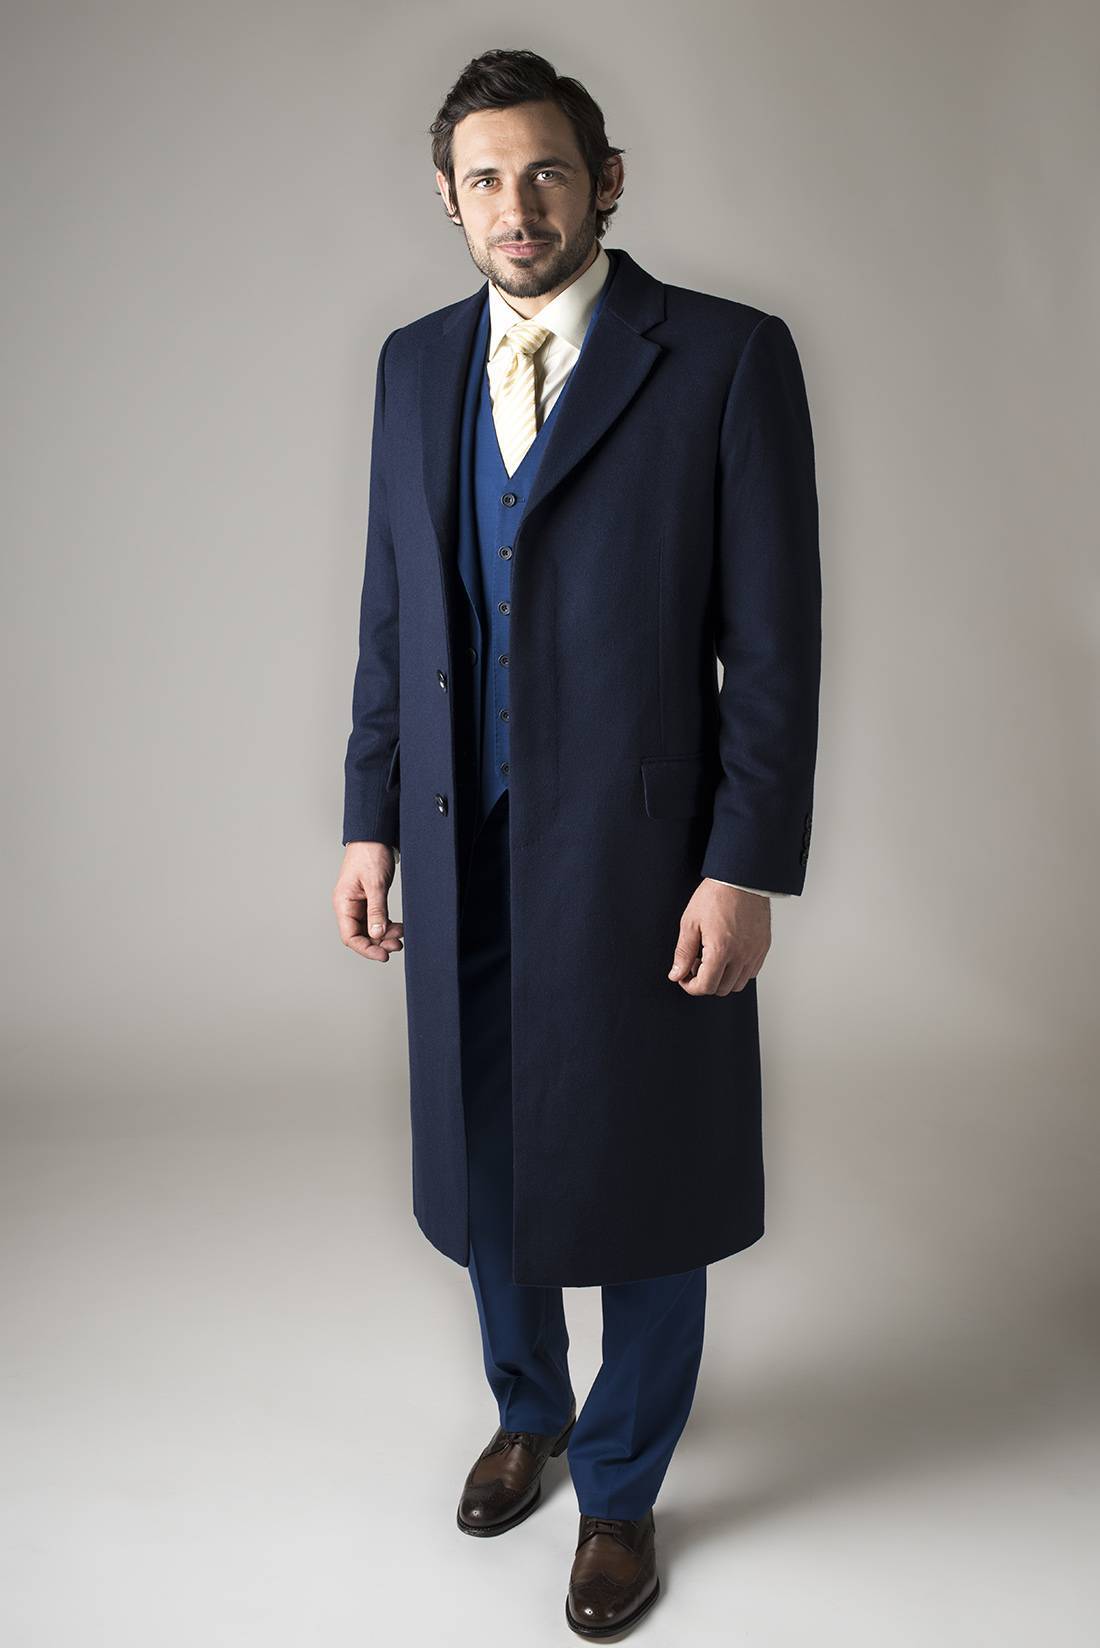 Handmade Cashmere Overcoats - The Outerwear You Must Own - Apsley Tailors